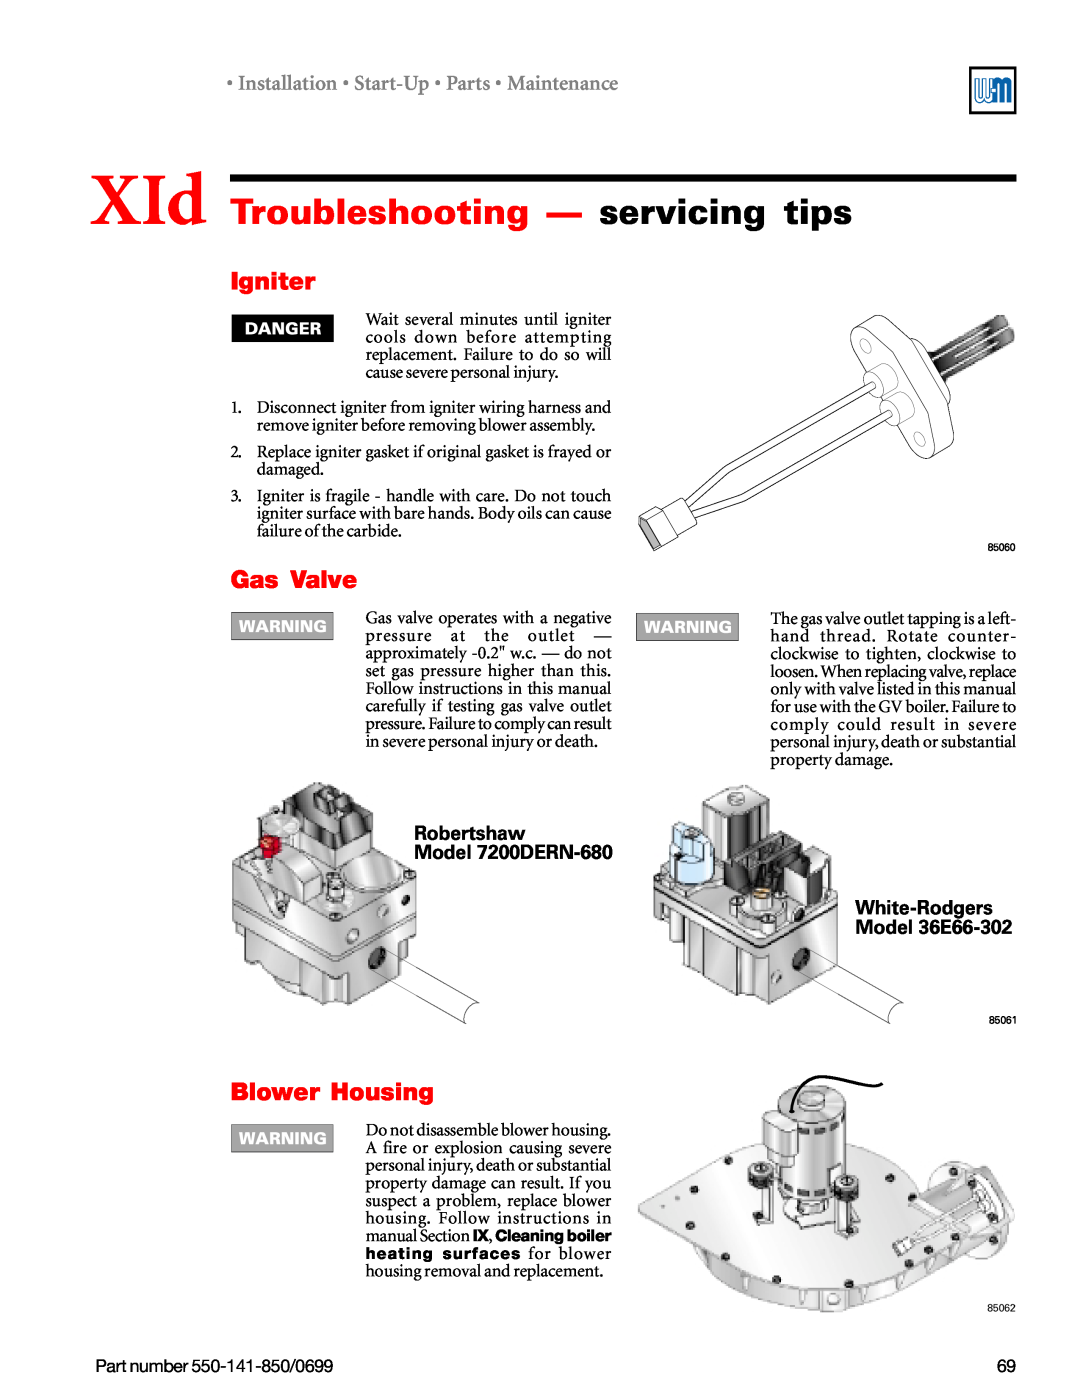 Weil-McLain 550-141-850/0599 XId Troubleshooting — servicing tips, Igniter, Gas Valve, Blower Housing, Model 36E66-302 